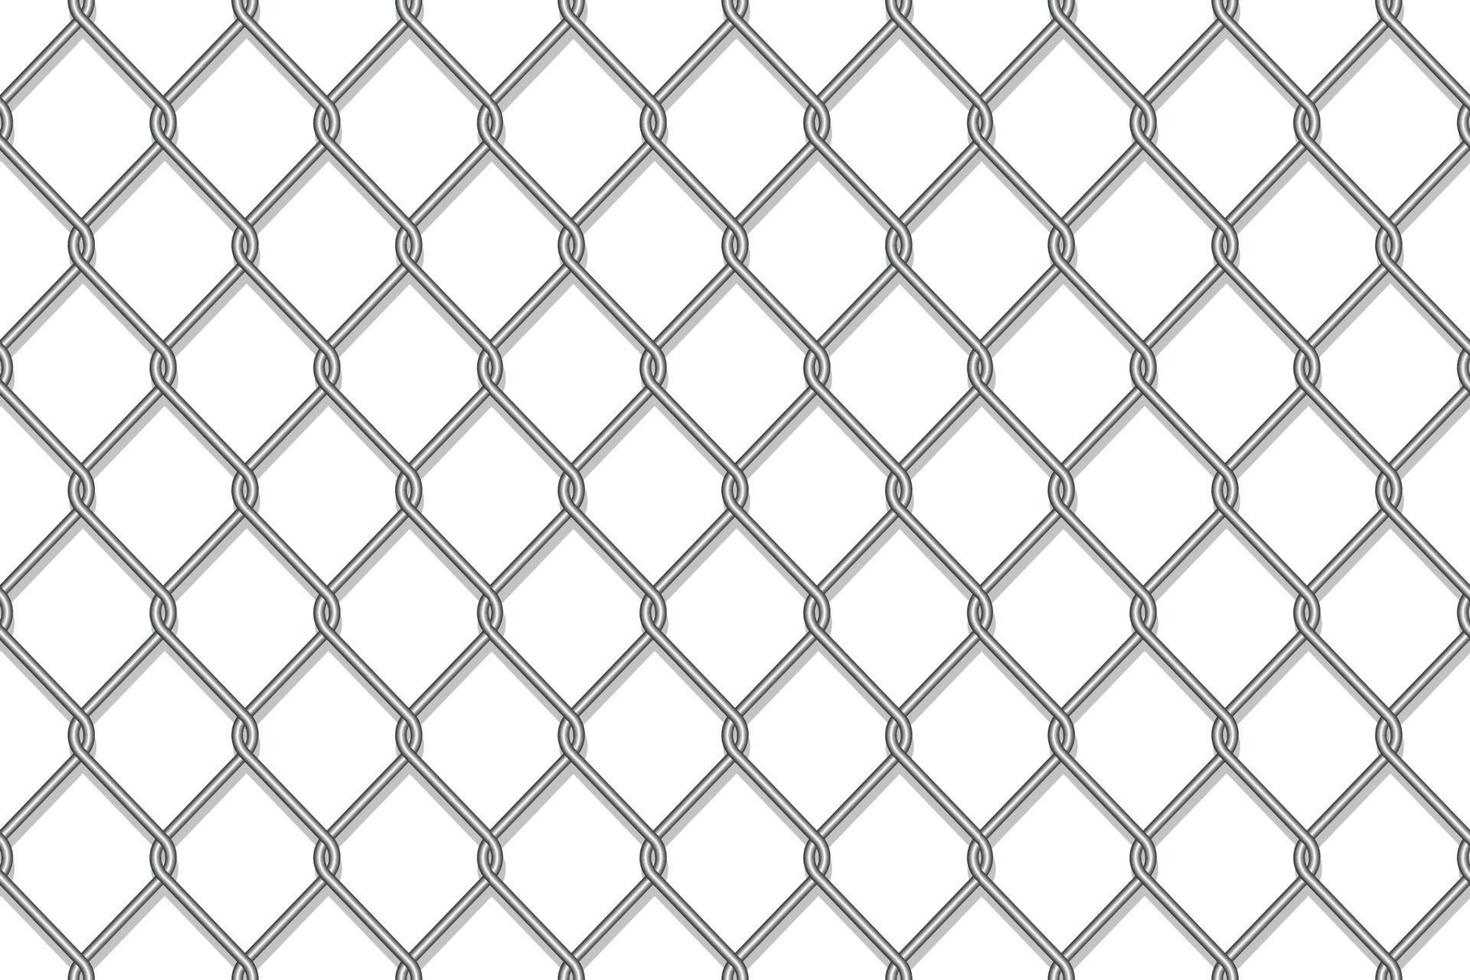 https://static.vecteezy.com/system/resources/previews/006/579/661/non_2x/realistic-metal-chain-link-fence-vector.jpg